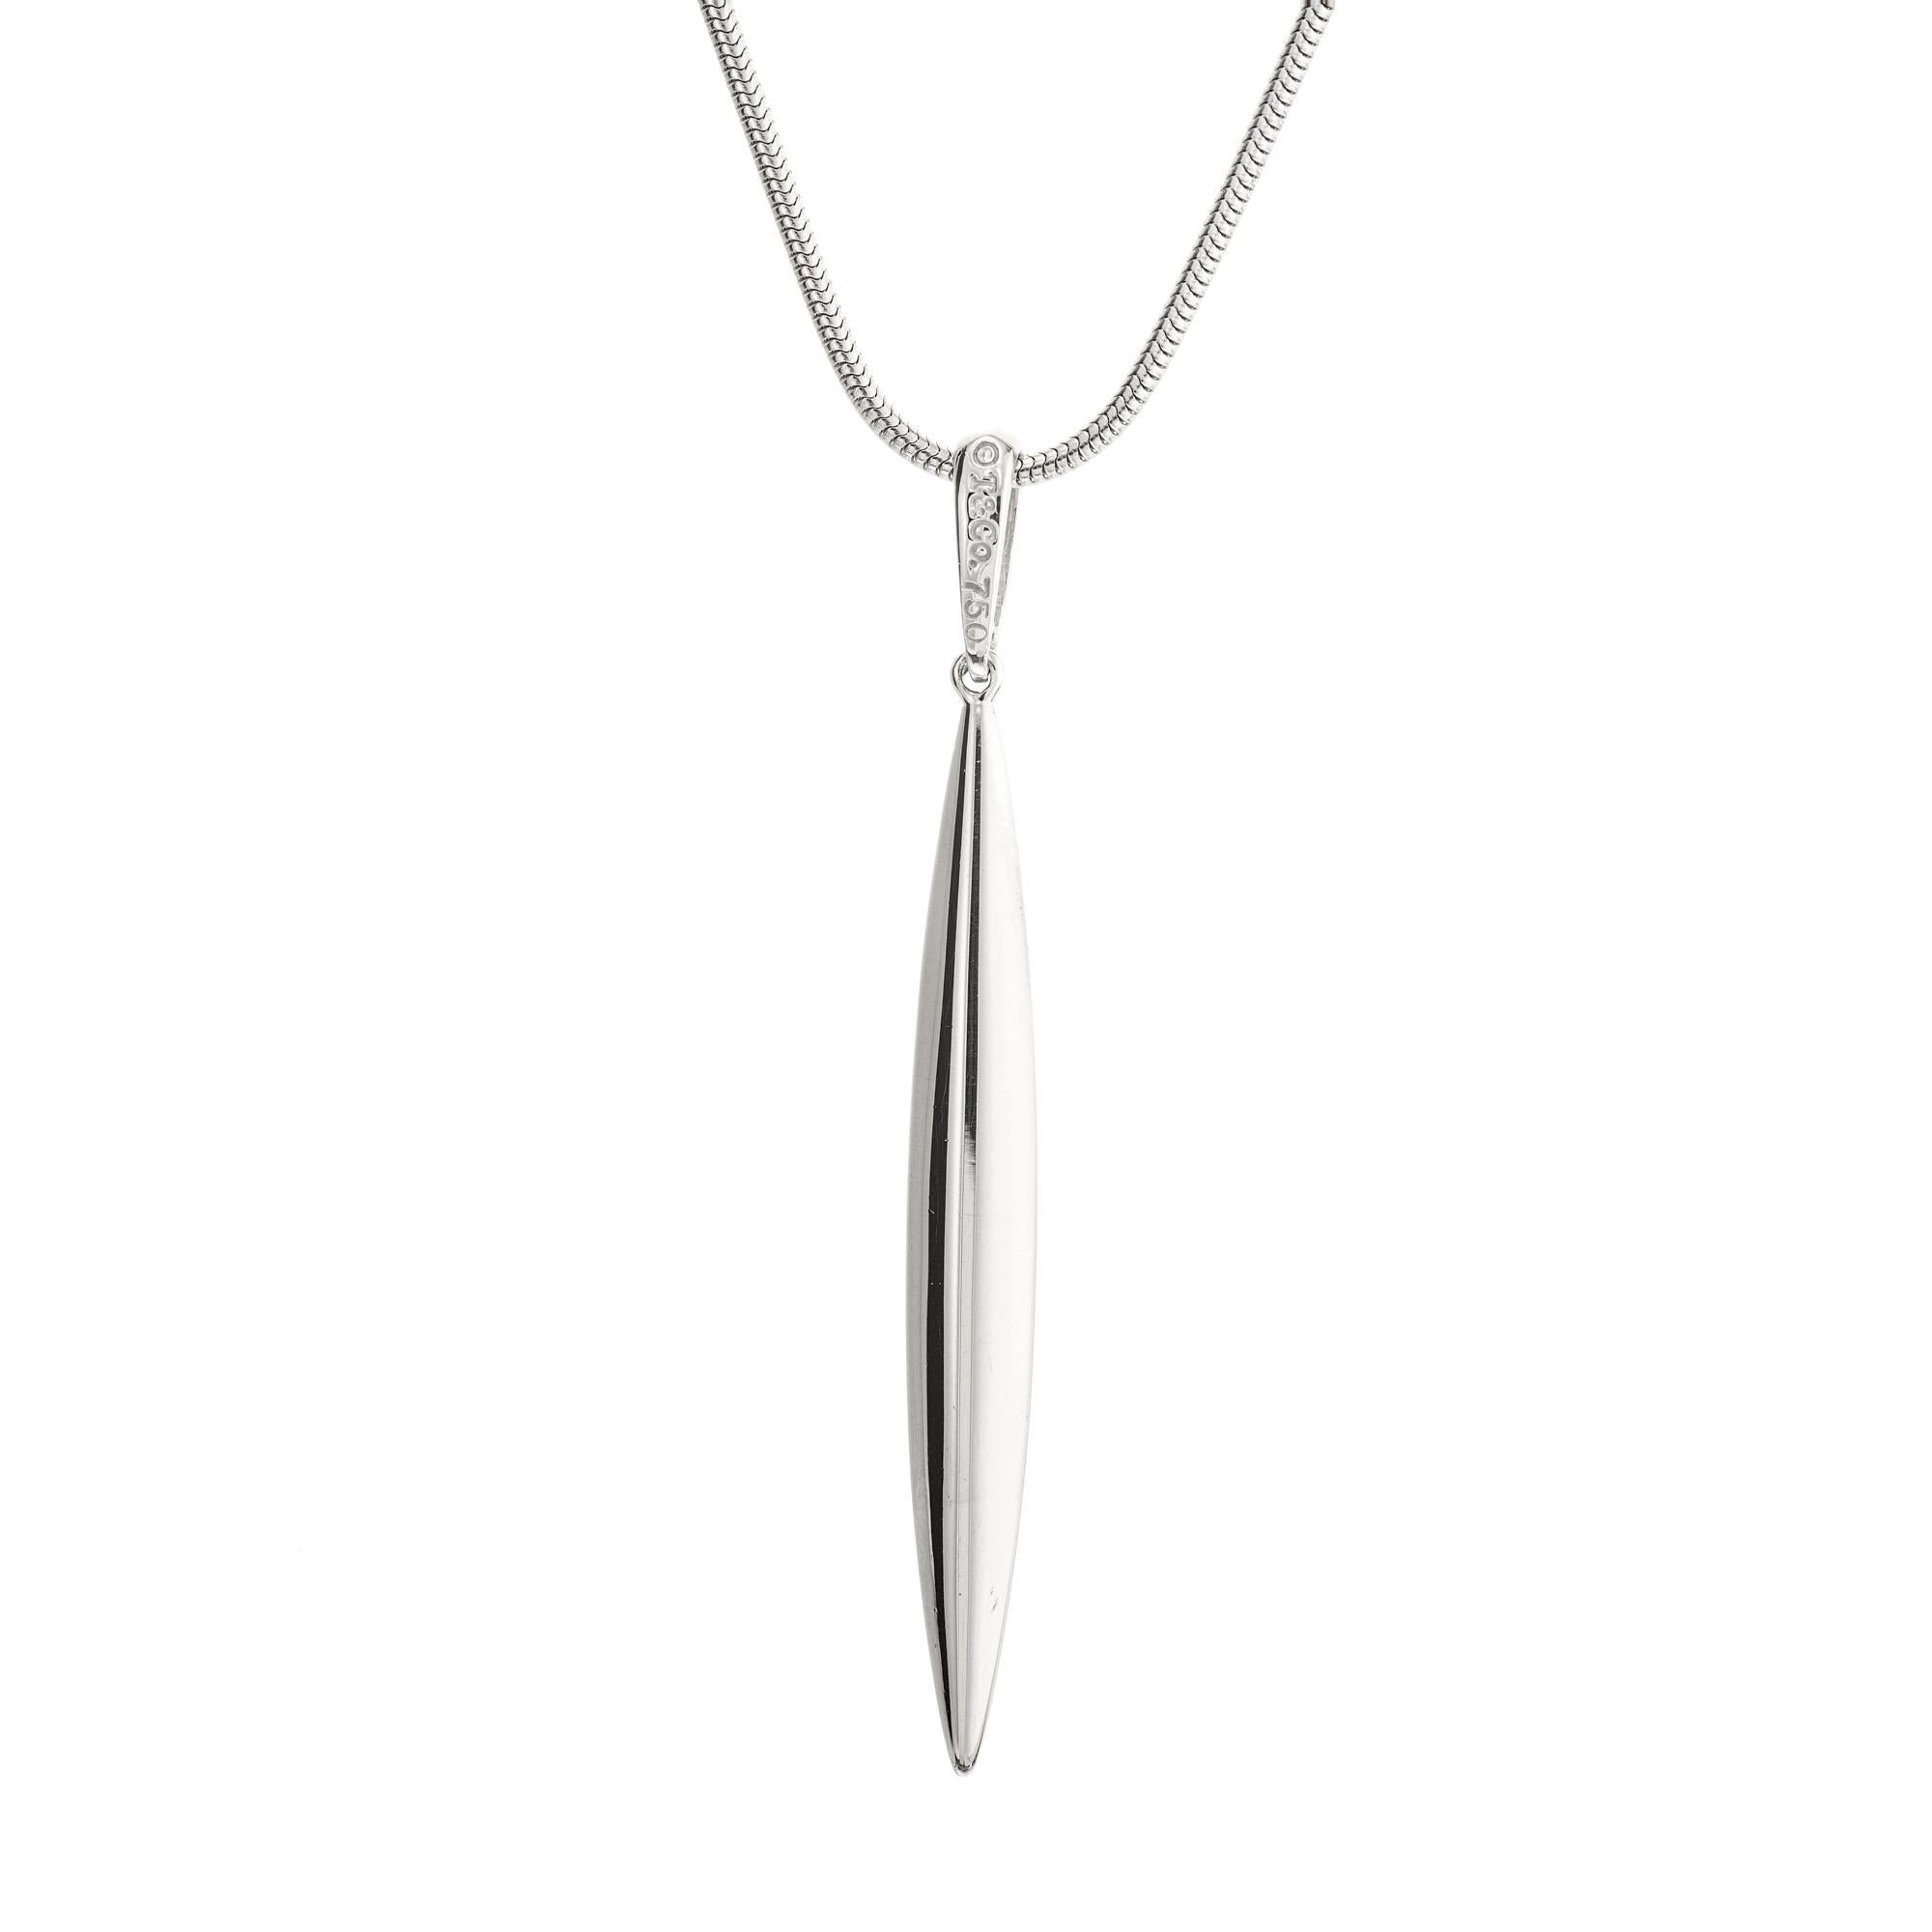 Tiffany and Co. 18k white gold feather pendant necklace in 18k white gold. 18k white gold 20 inch chain.

18k white gold 
Stamped: T + Co 750
Hallmark: T +Co
10.7 grams
Top to bottom: 50mm or 1 15/16 Inch
Width: 5mm or 3/16 Inch
Depth or thickness: